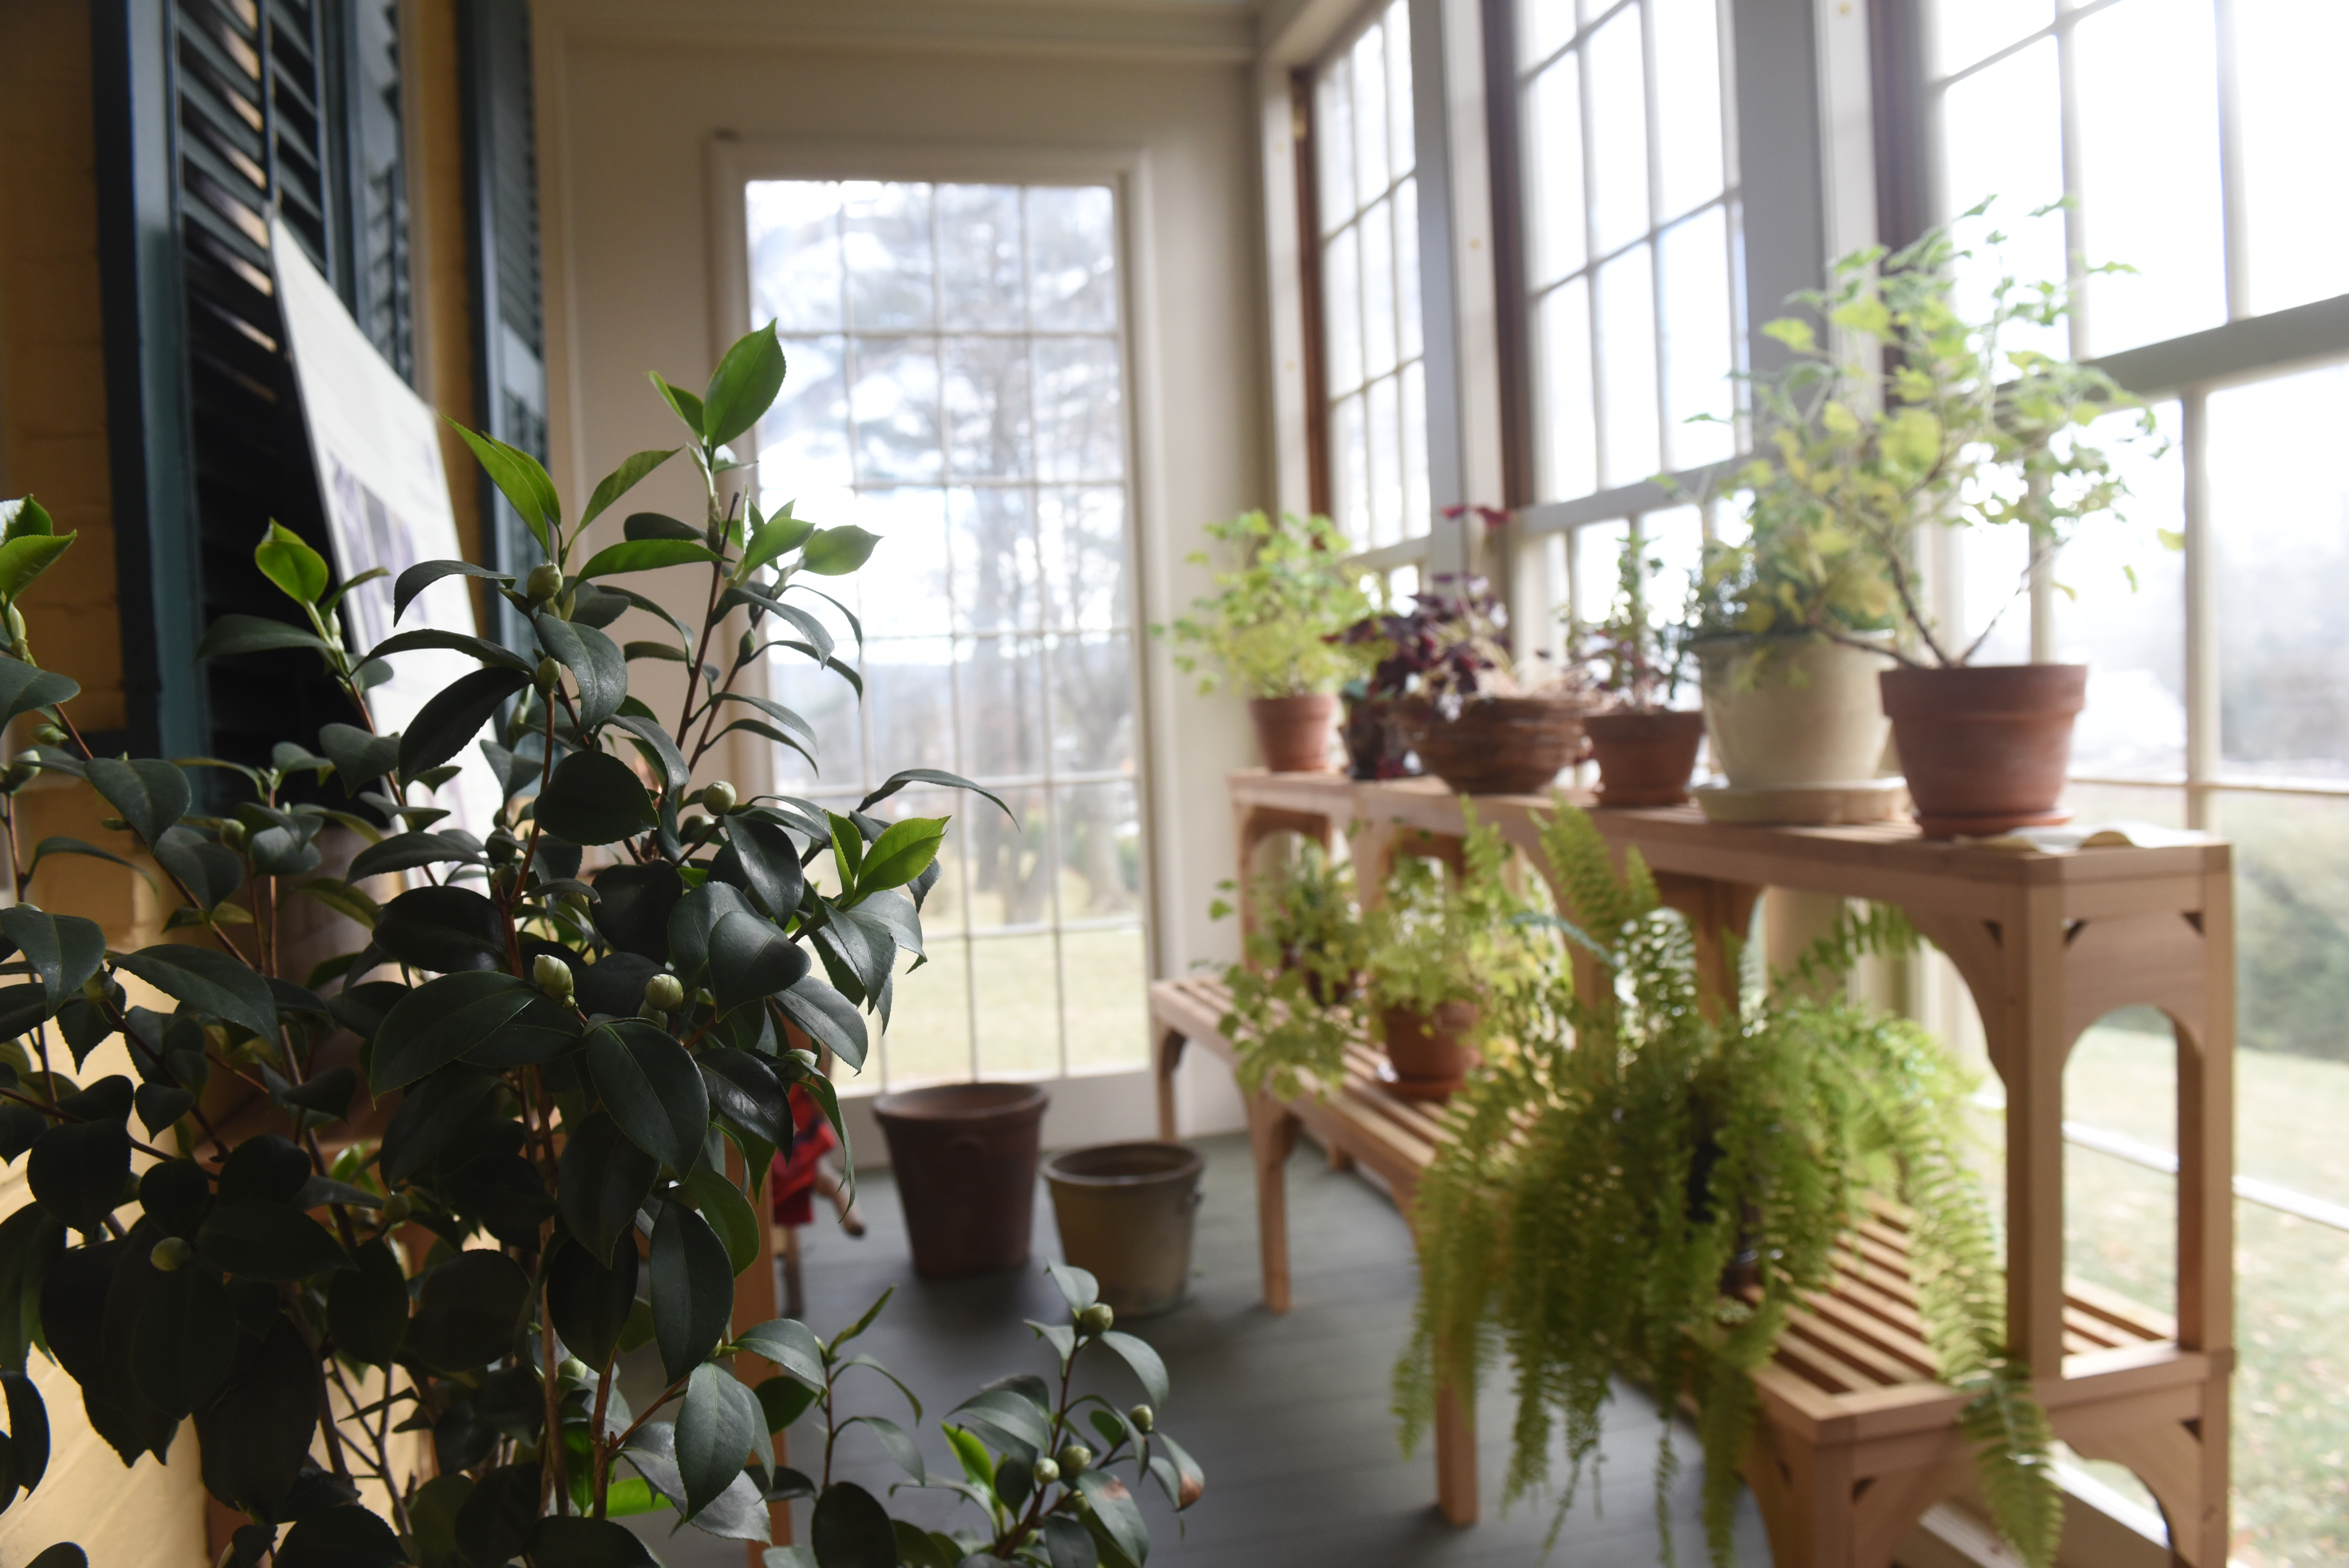 The conservatory in the Dickinson Homestead, with plants in a sunny window